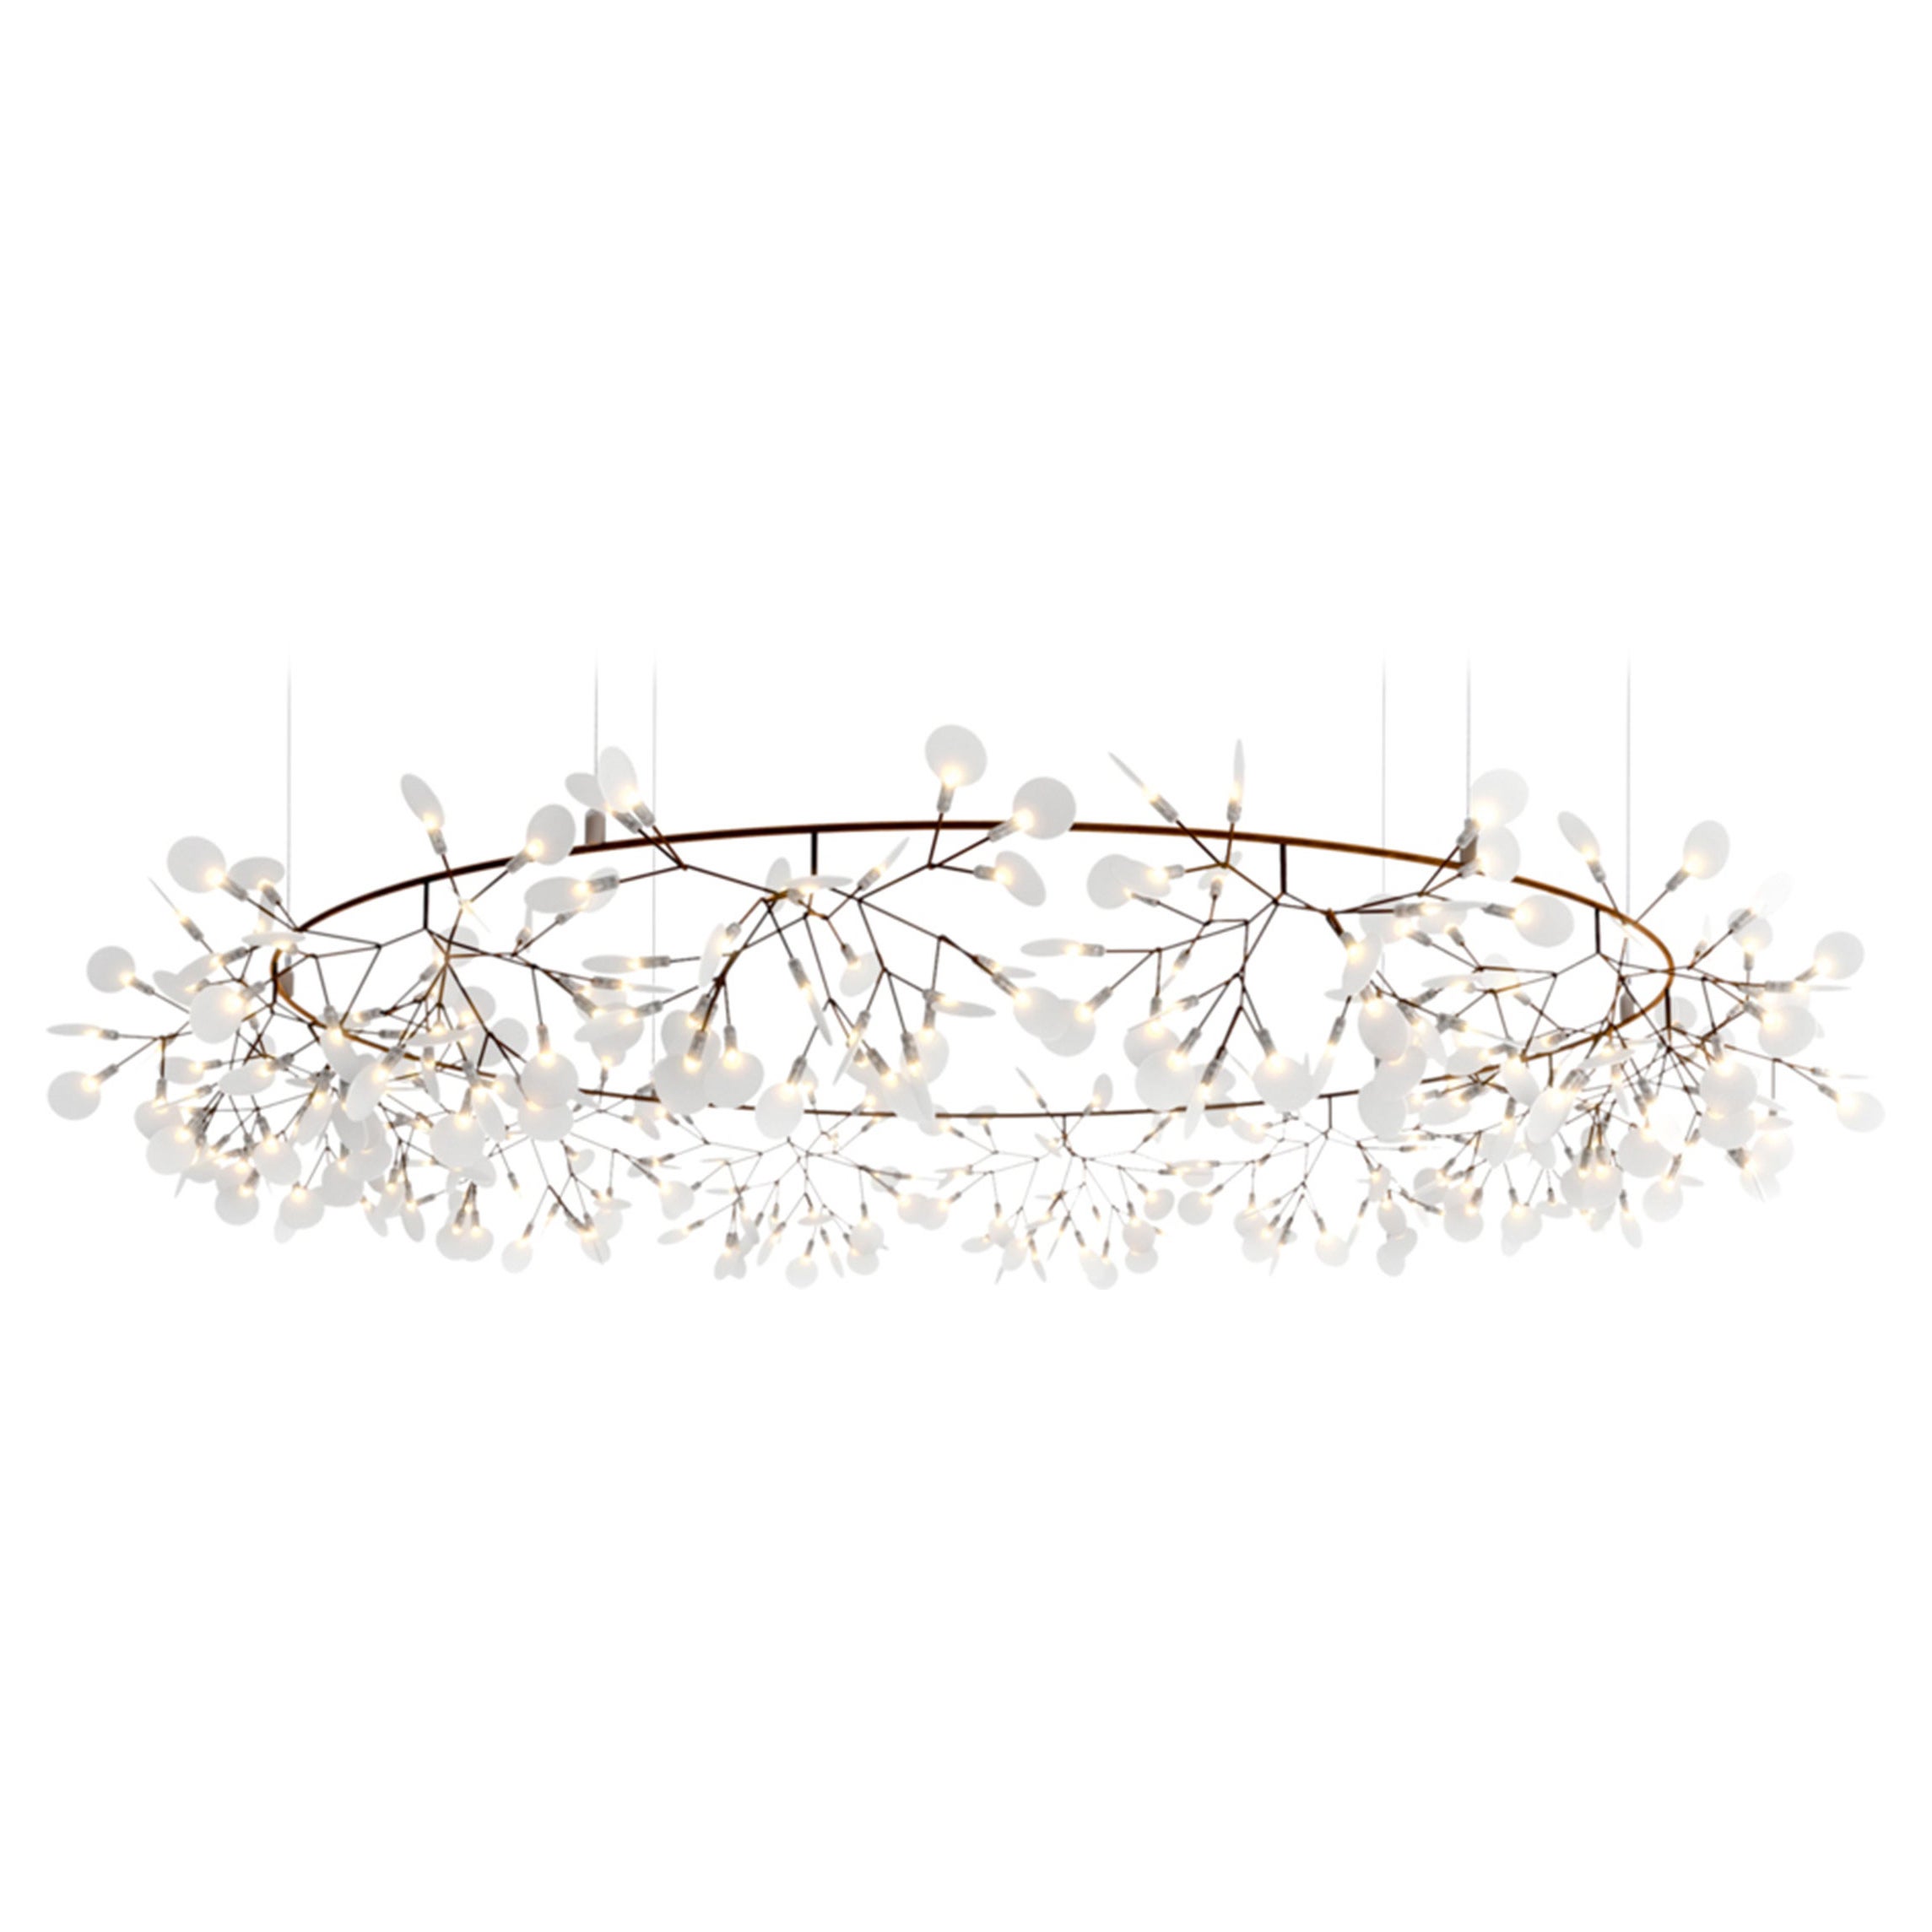 Moooi Heracleum The Big O Large Suspension Lamp in Copper by Bertjan Pot For Sale